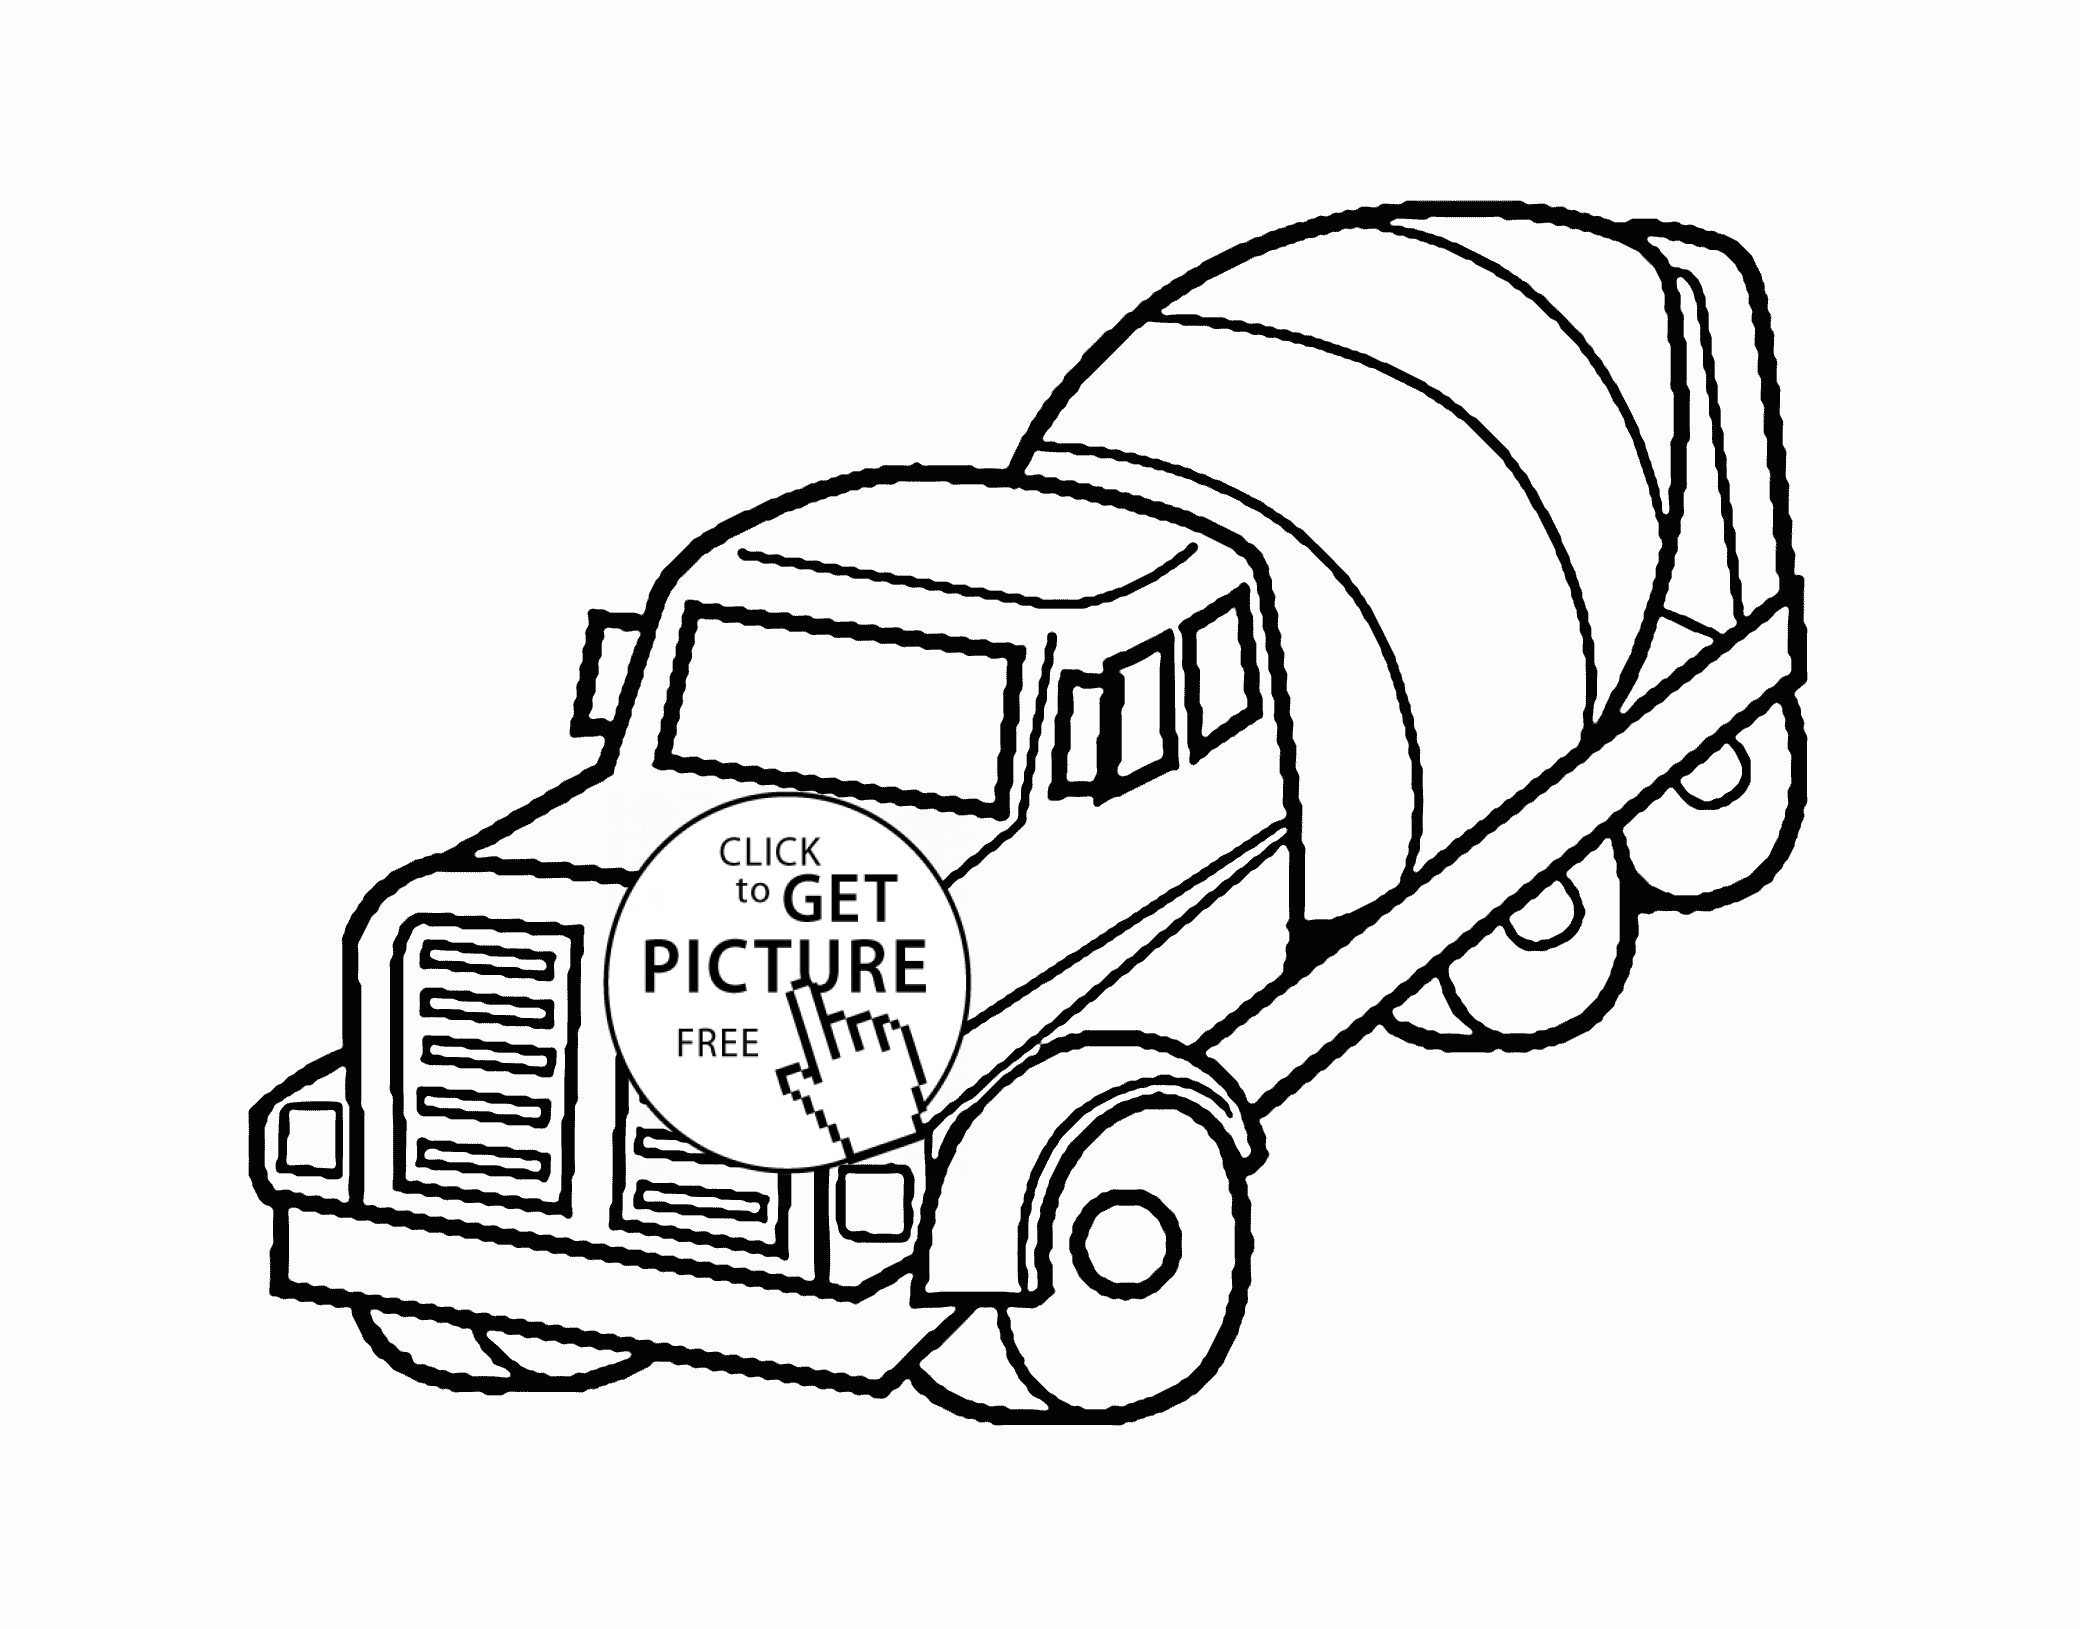 Cement Mixer Truck coloring page for kids, transportation coloring